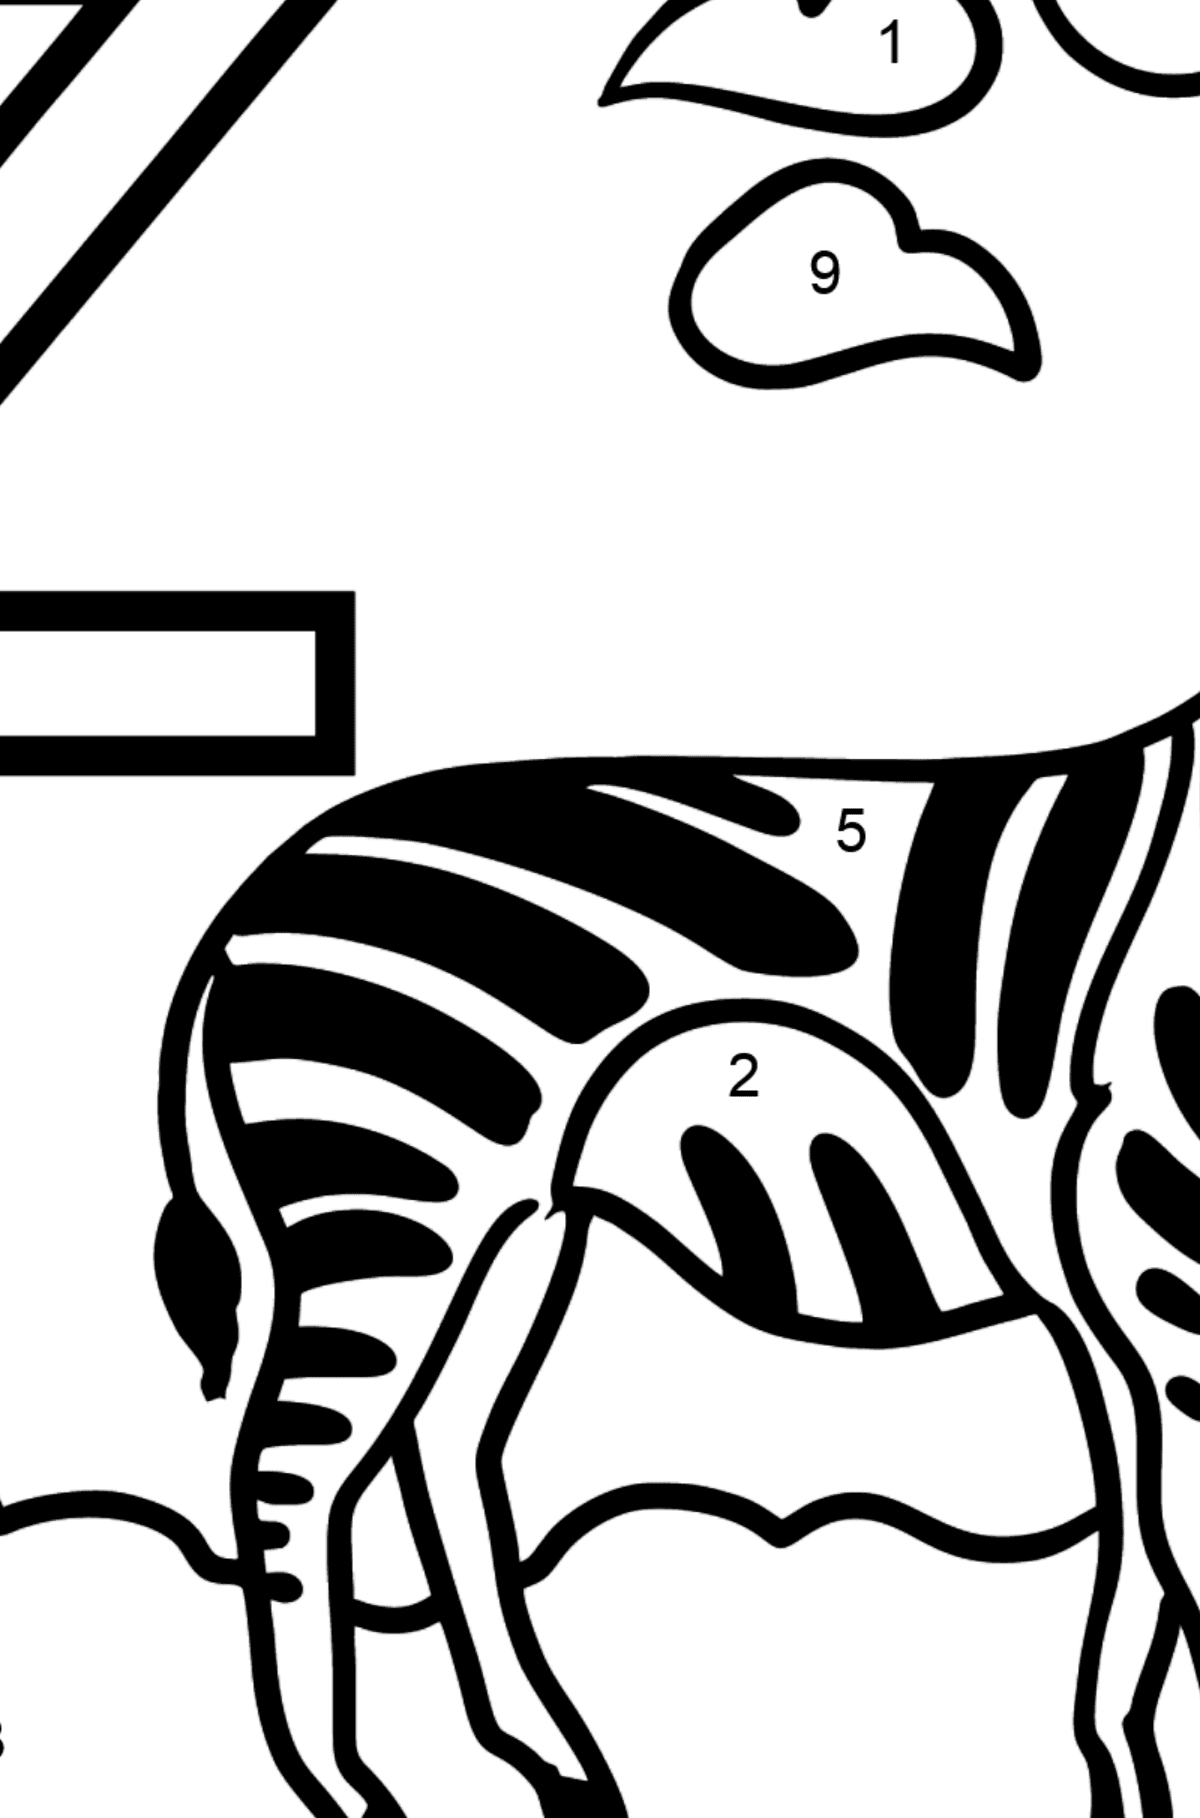 English Letter Z coloring pages - ZEBRA - Coloring by Numbers for Kids